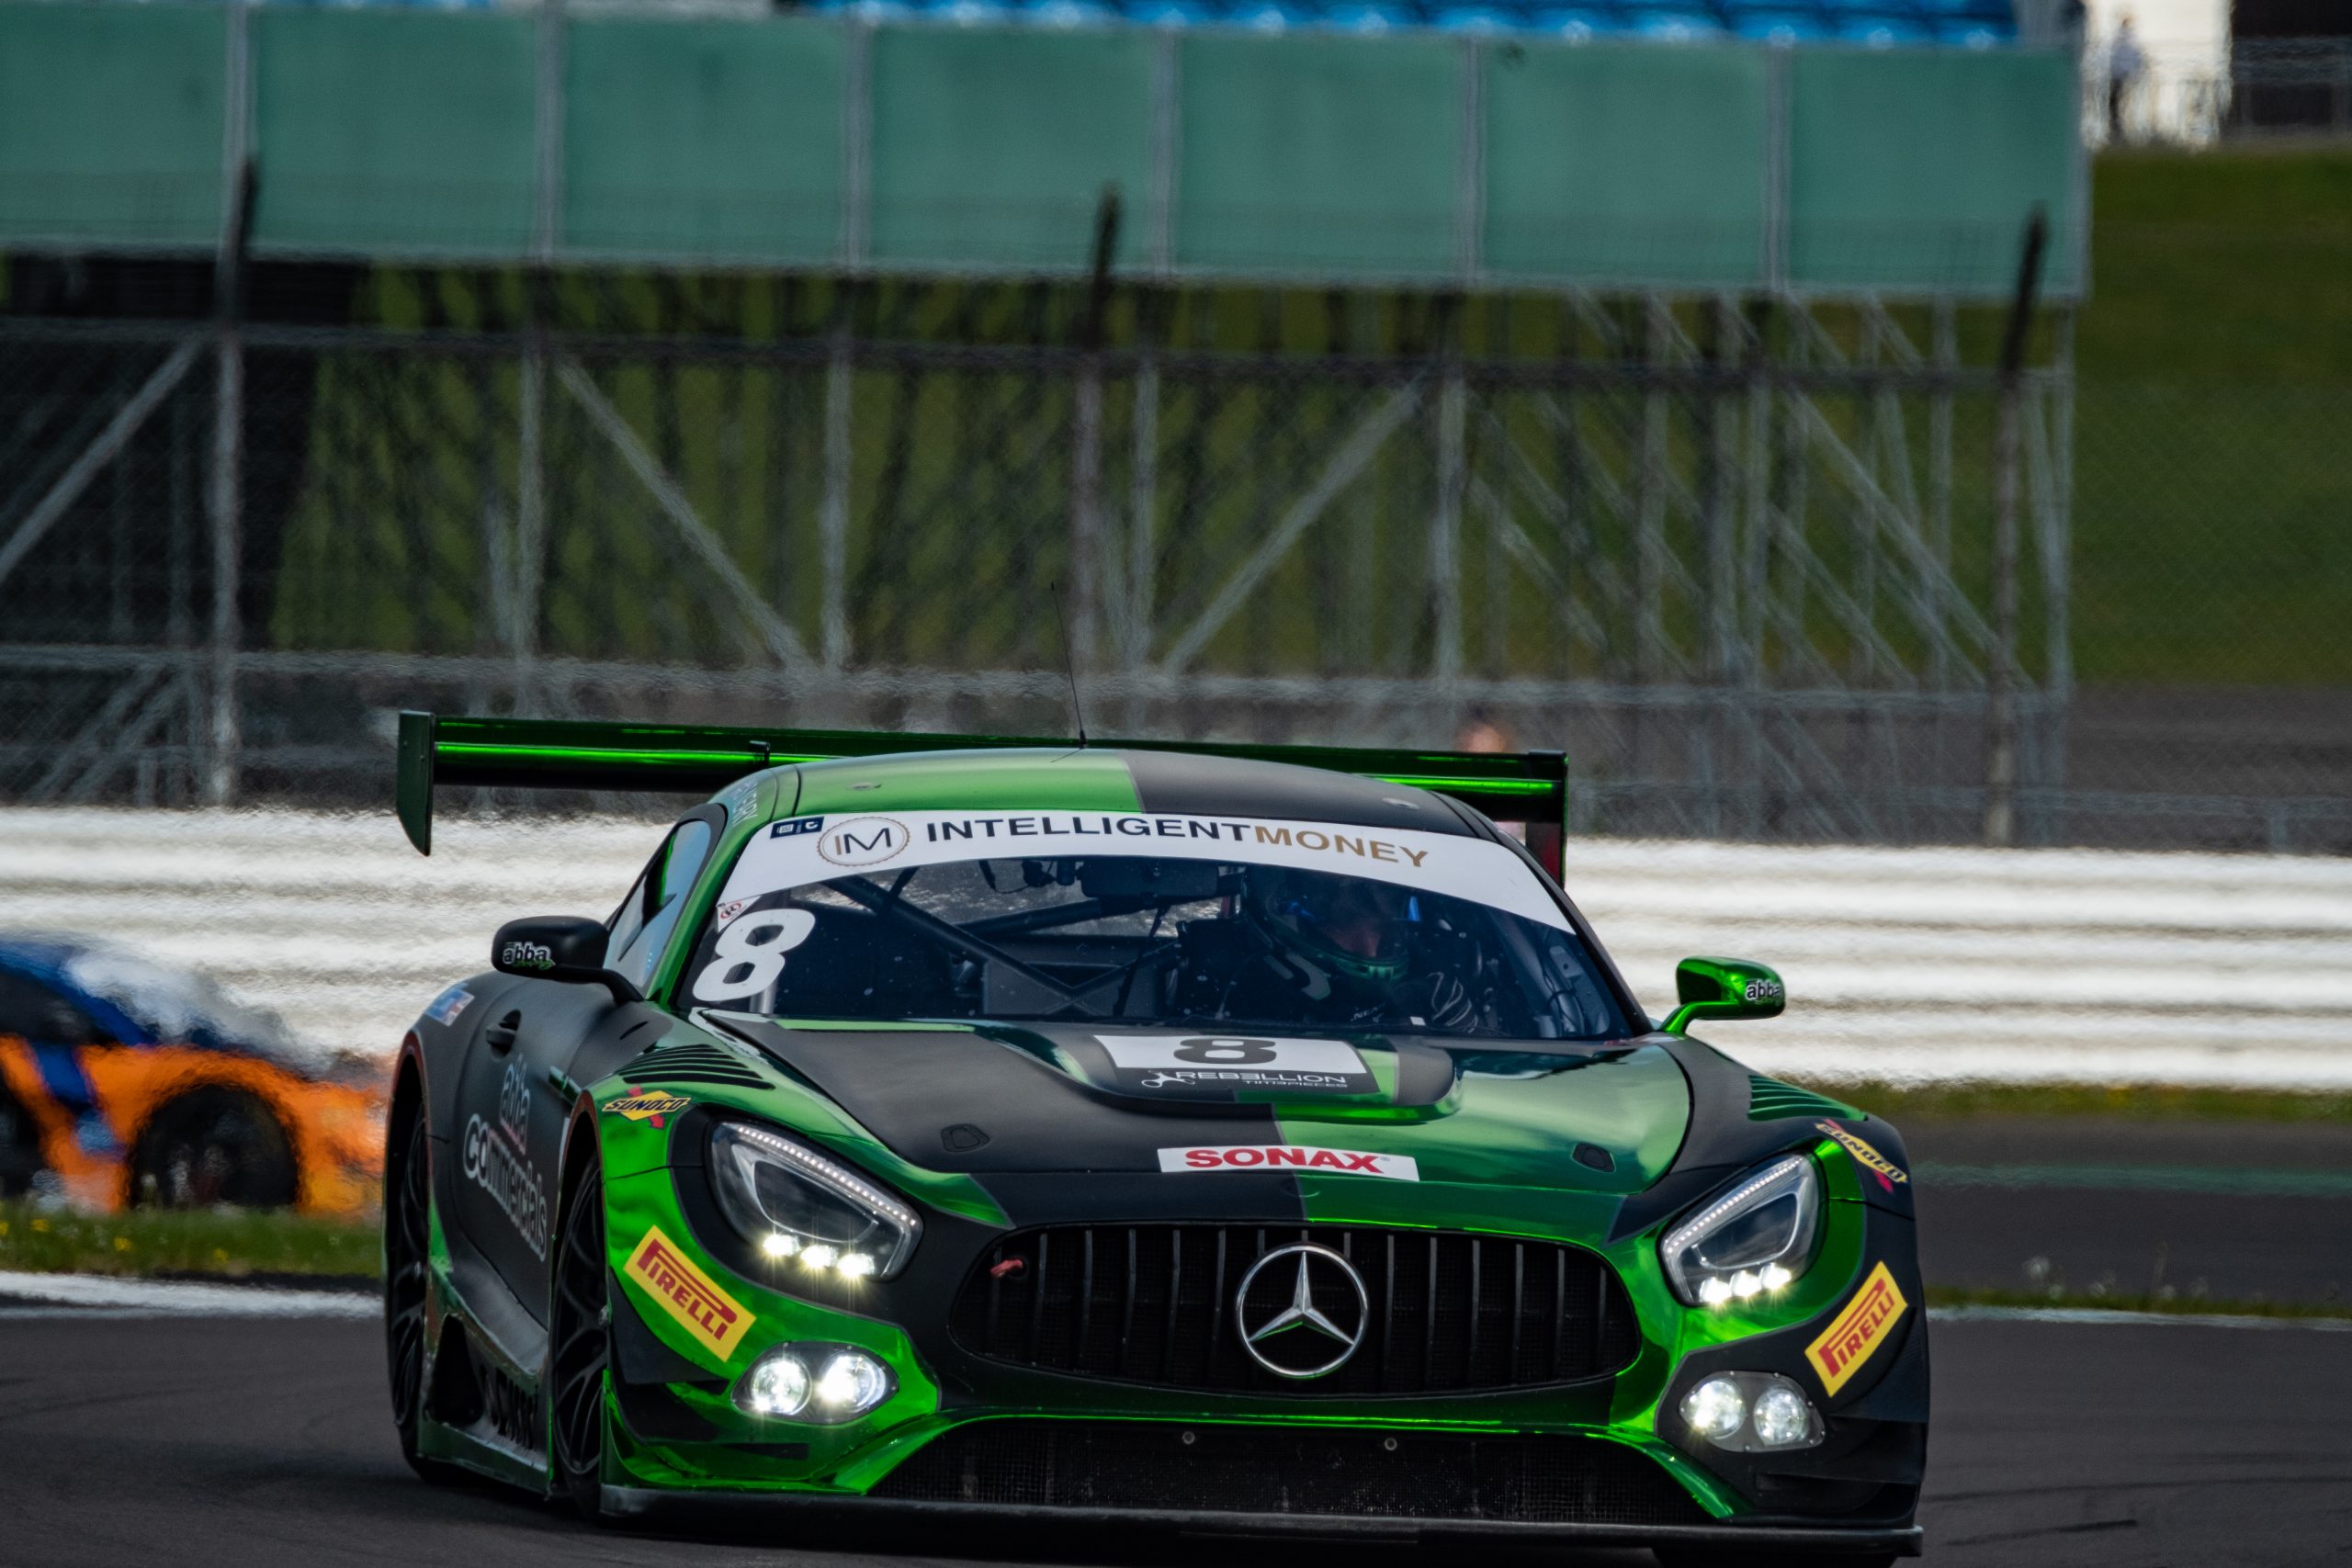 The Team ABBA Racing Mercedes-AMG returns for 2023